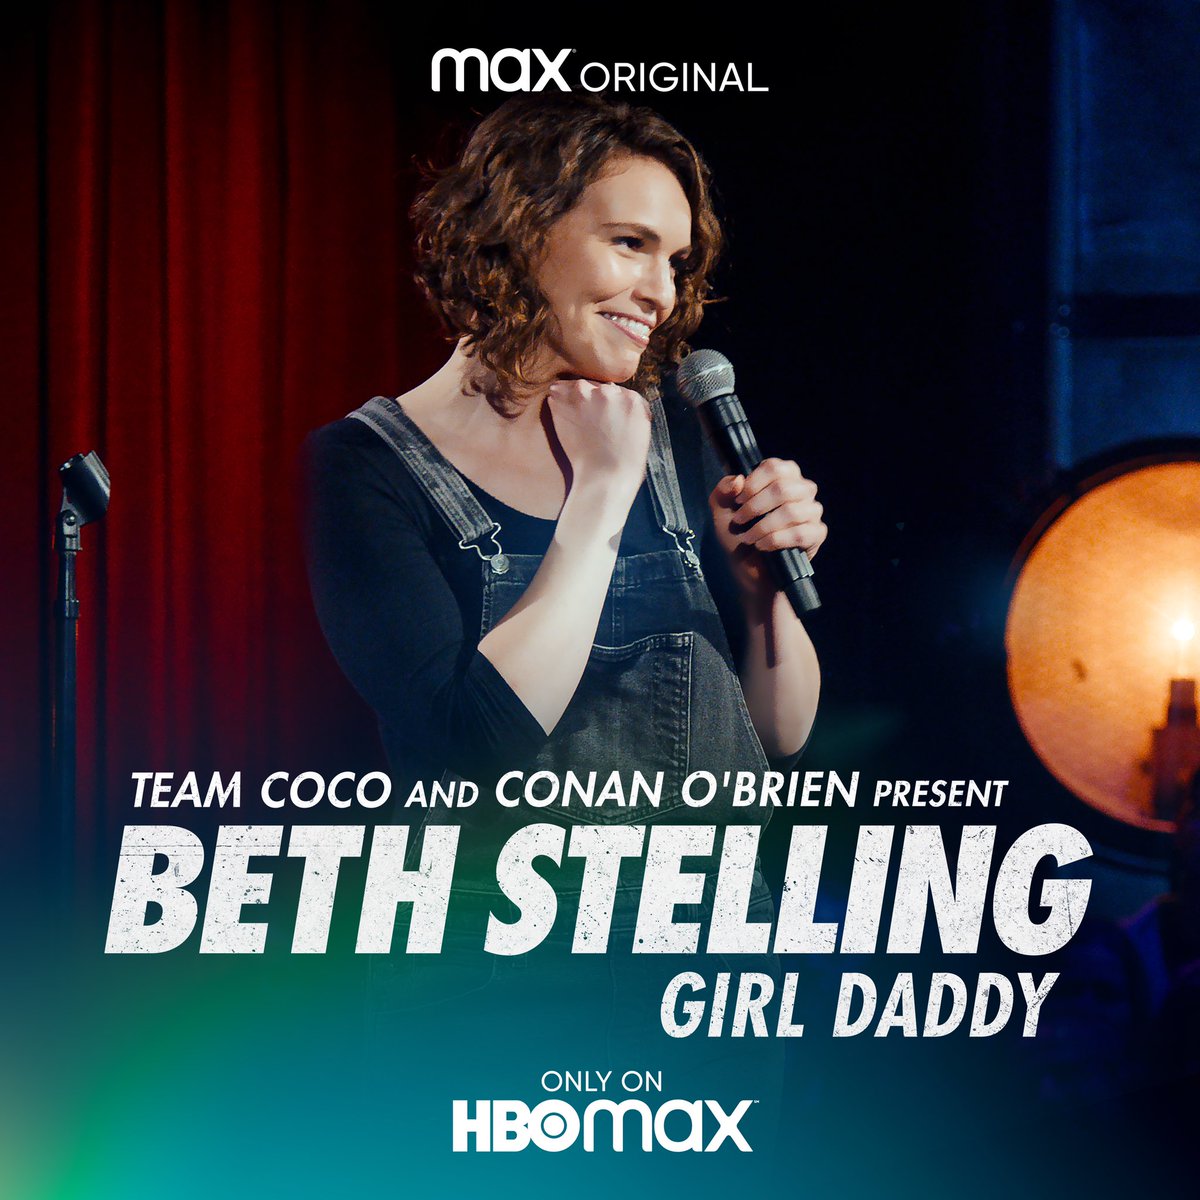 Ooooh Emmy voting starts today
And @BethStelling ‘s #GIRLDADDY is on the docket!! 